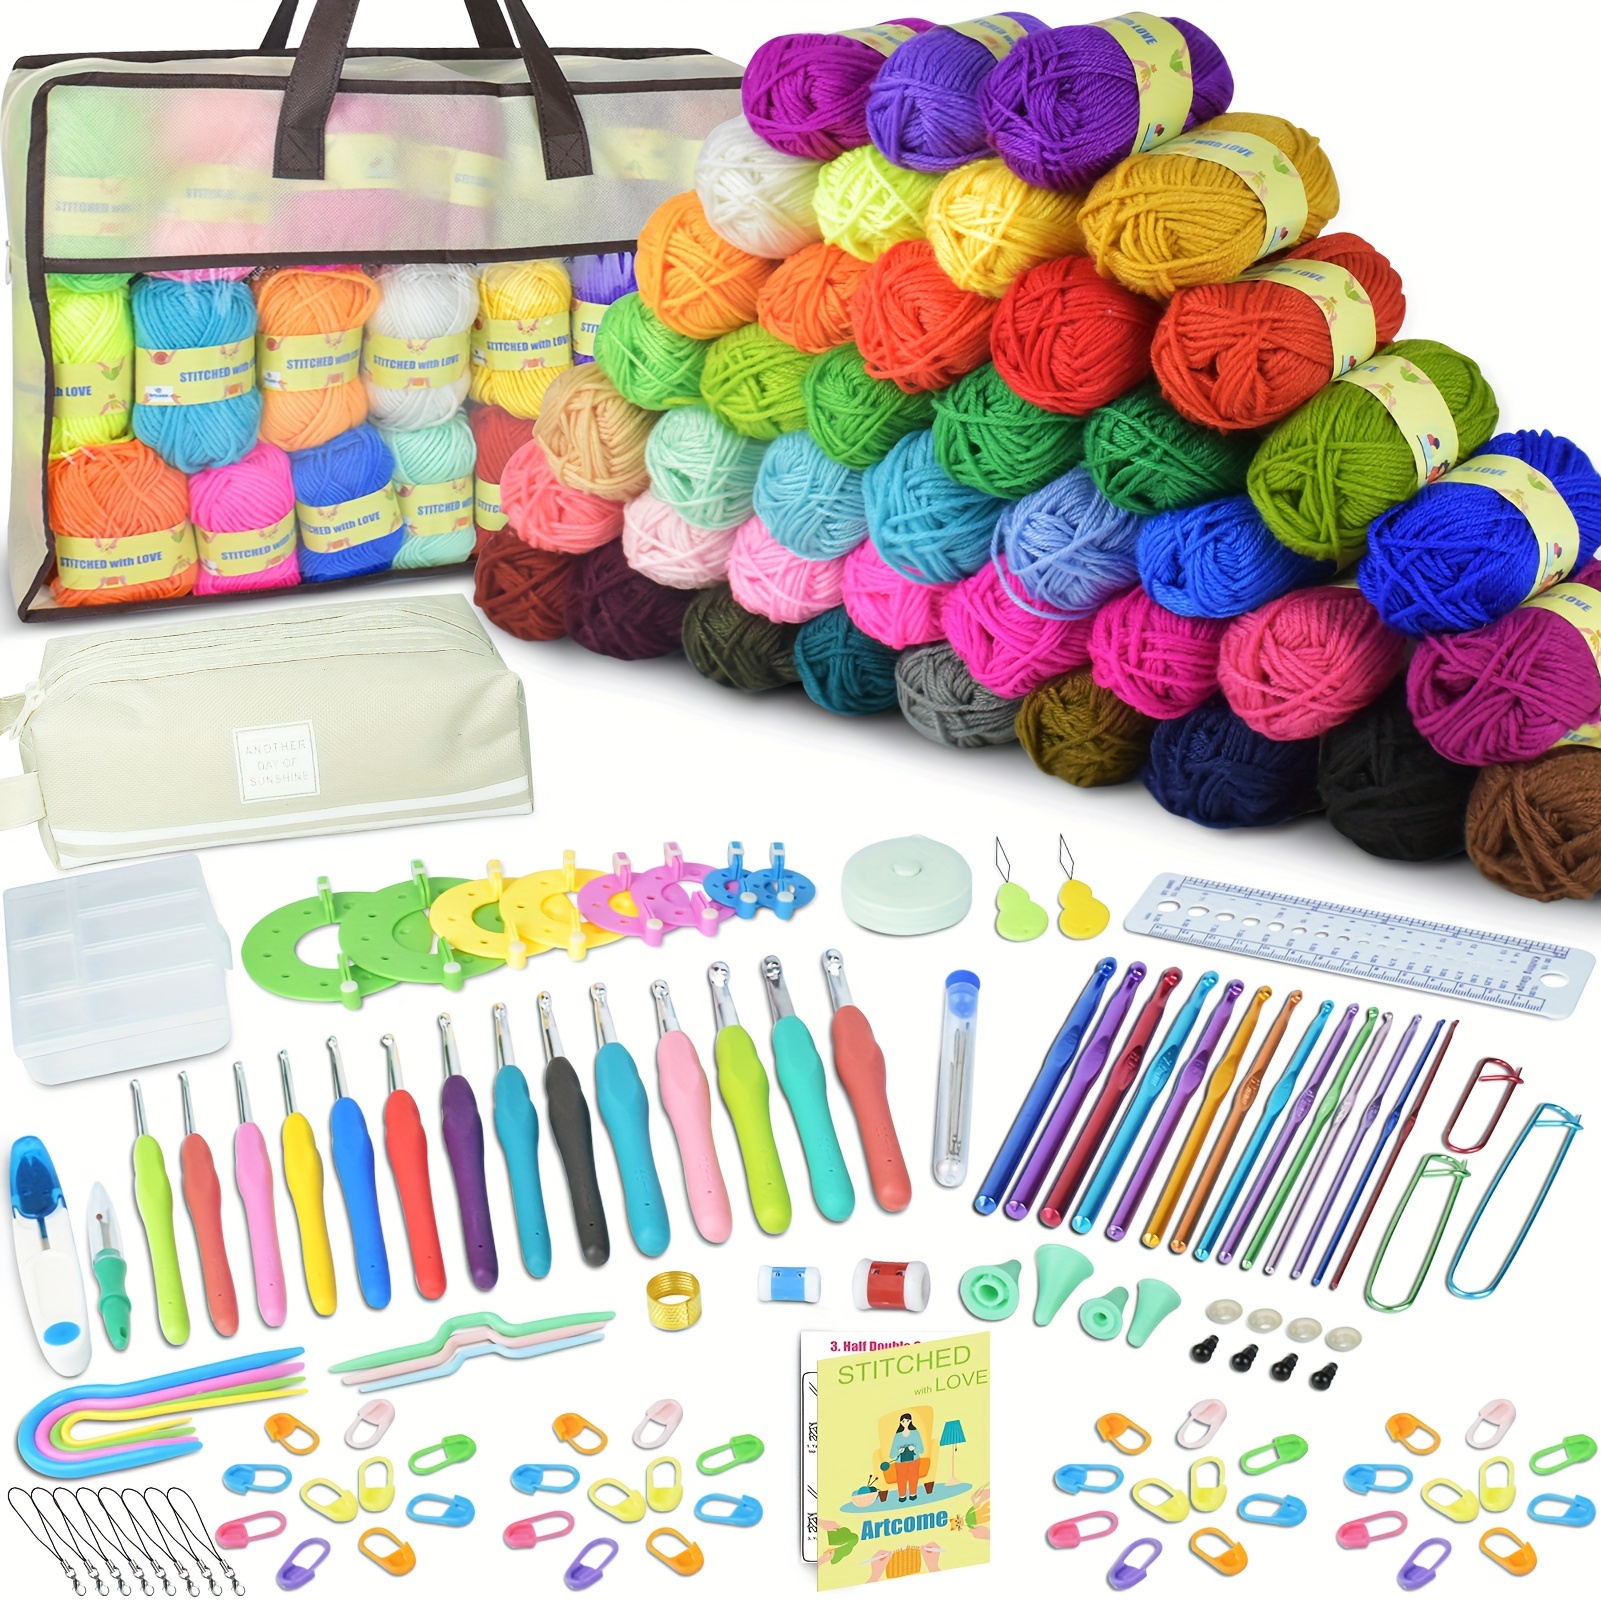 

169pcs/set Of Crochet Kit, Crochet Yarn And Crochet Hooks For Beginners And Experienced Crocheters, Beginner Crochet Kit For Adults, Ideal For Creating Beautiful Projects